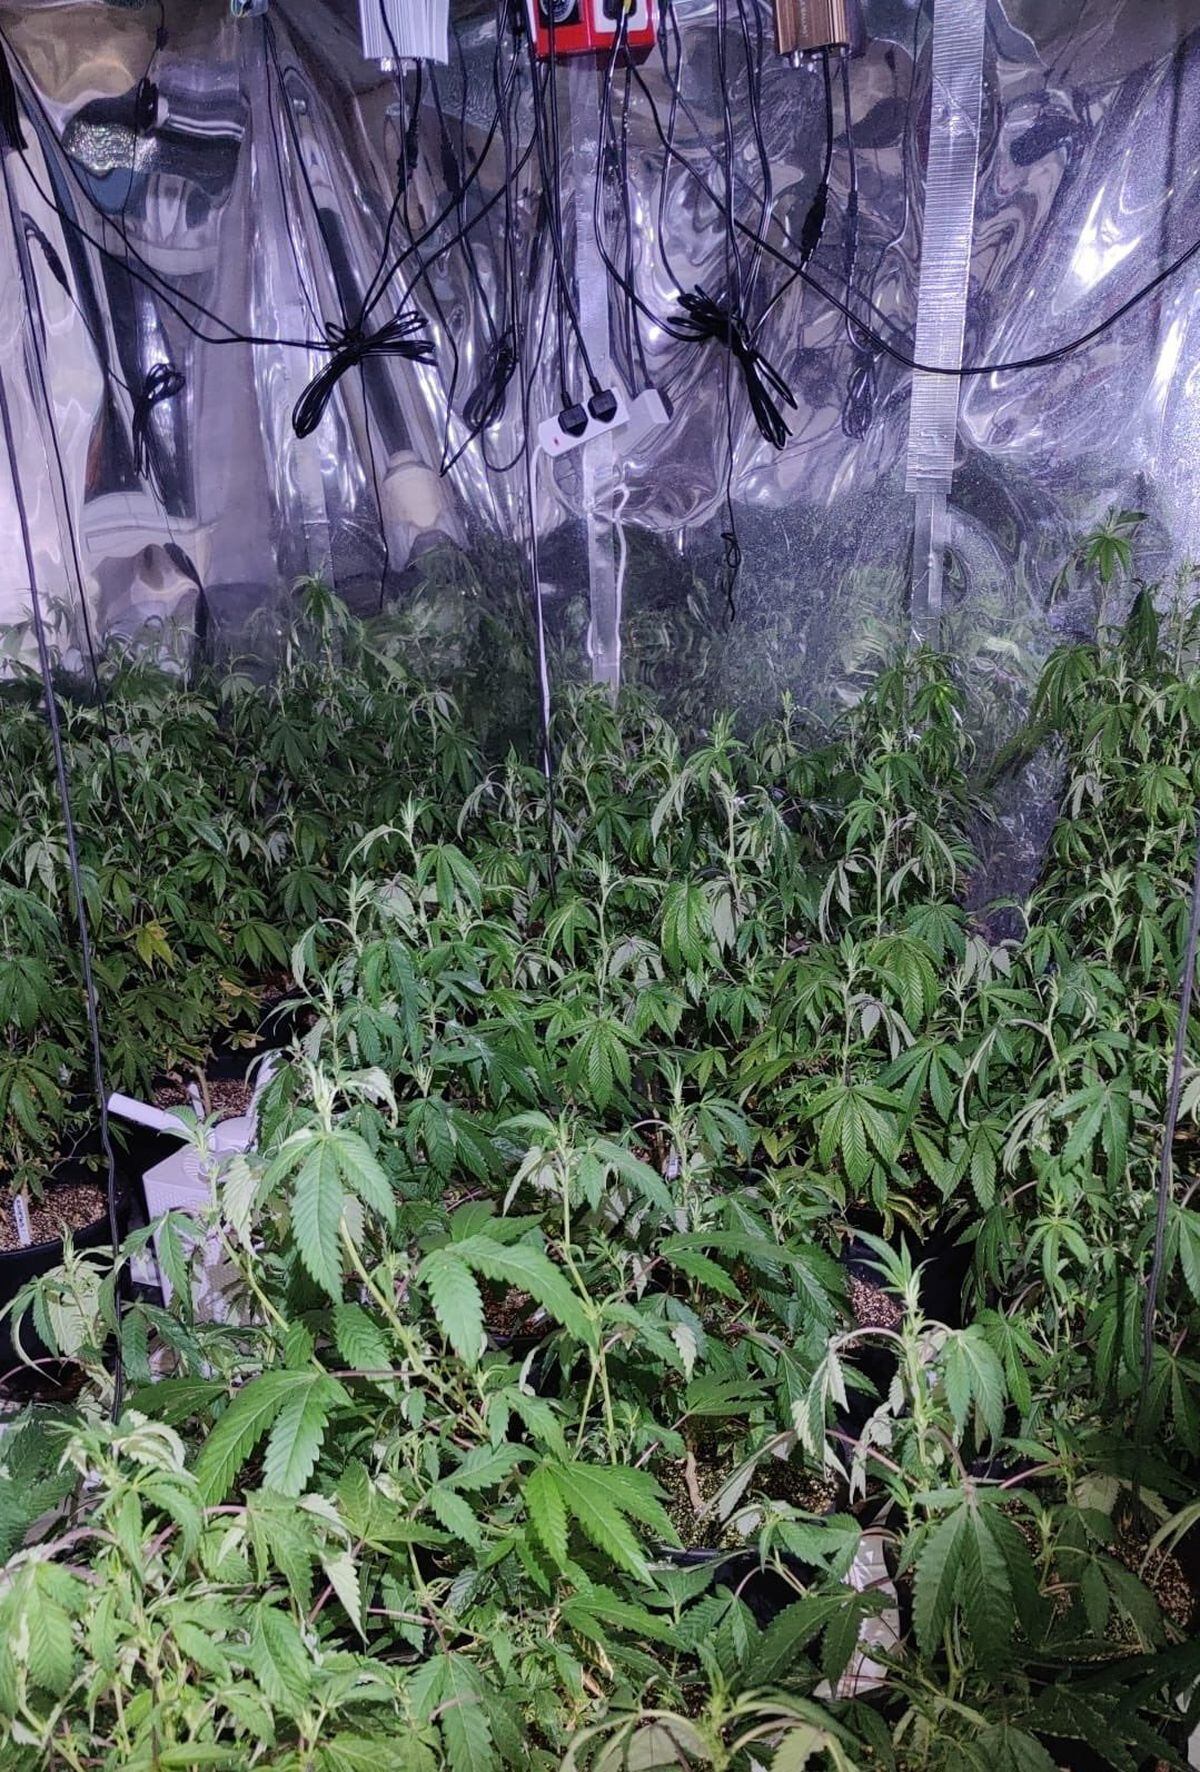 Cannabis found in the Willenhall drugs farms